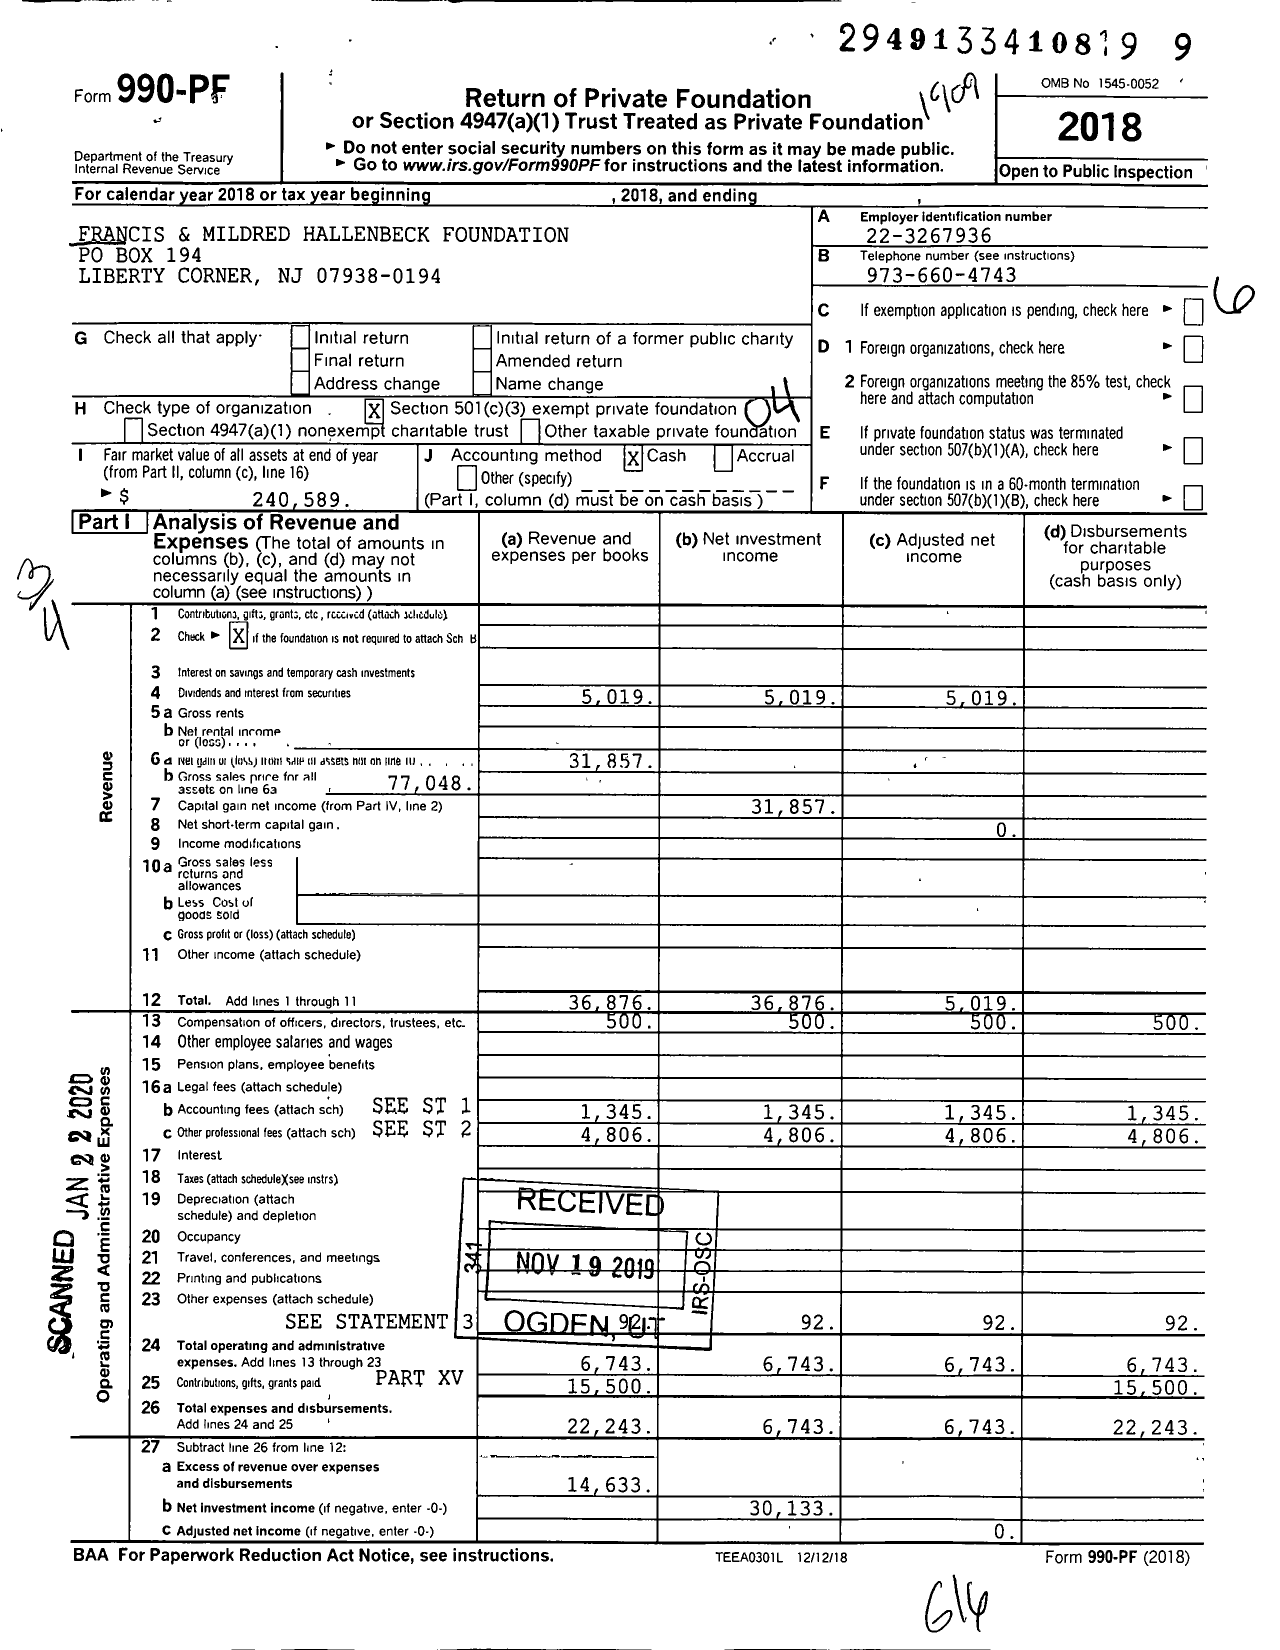 Image of first page of 2018 Form 990PF for Francis and Mildred Hallenbeck Foundation